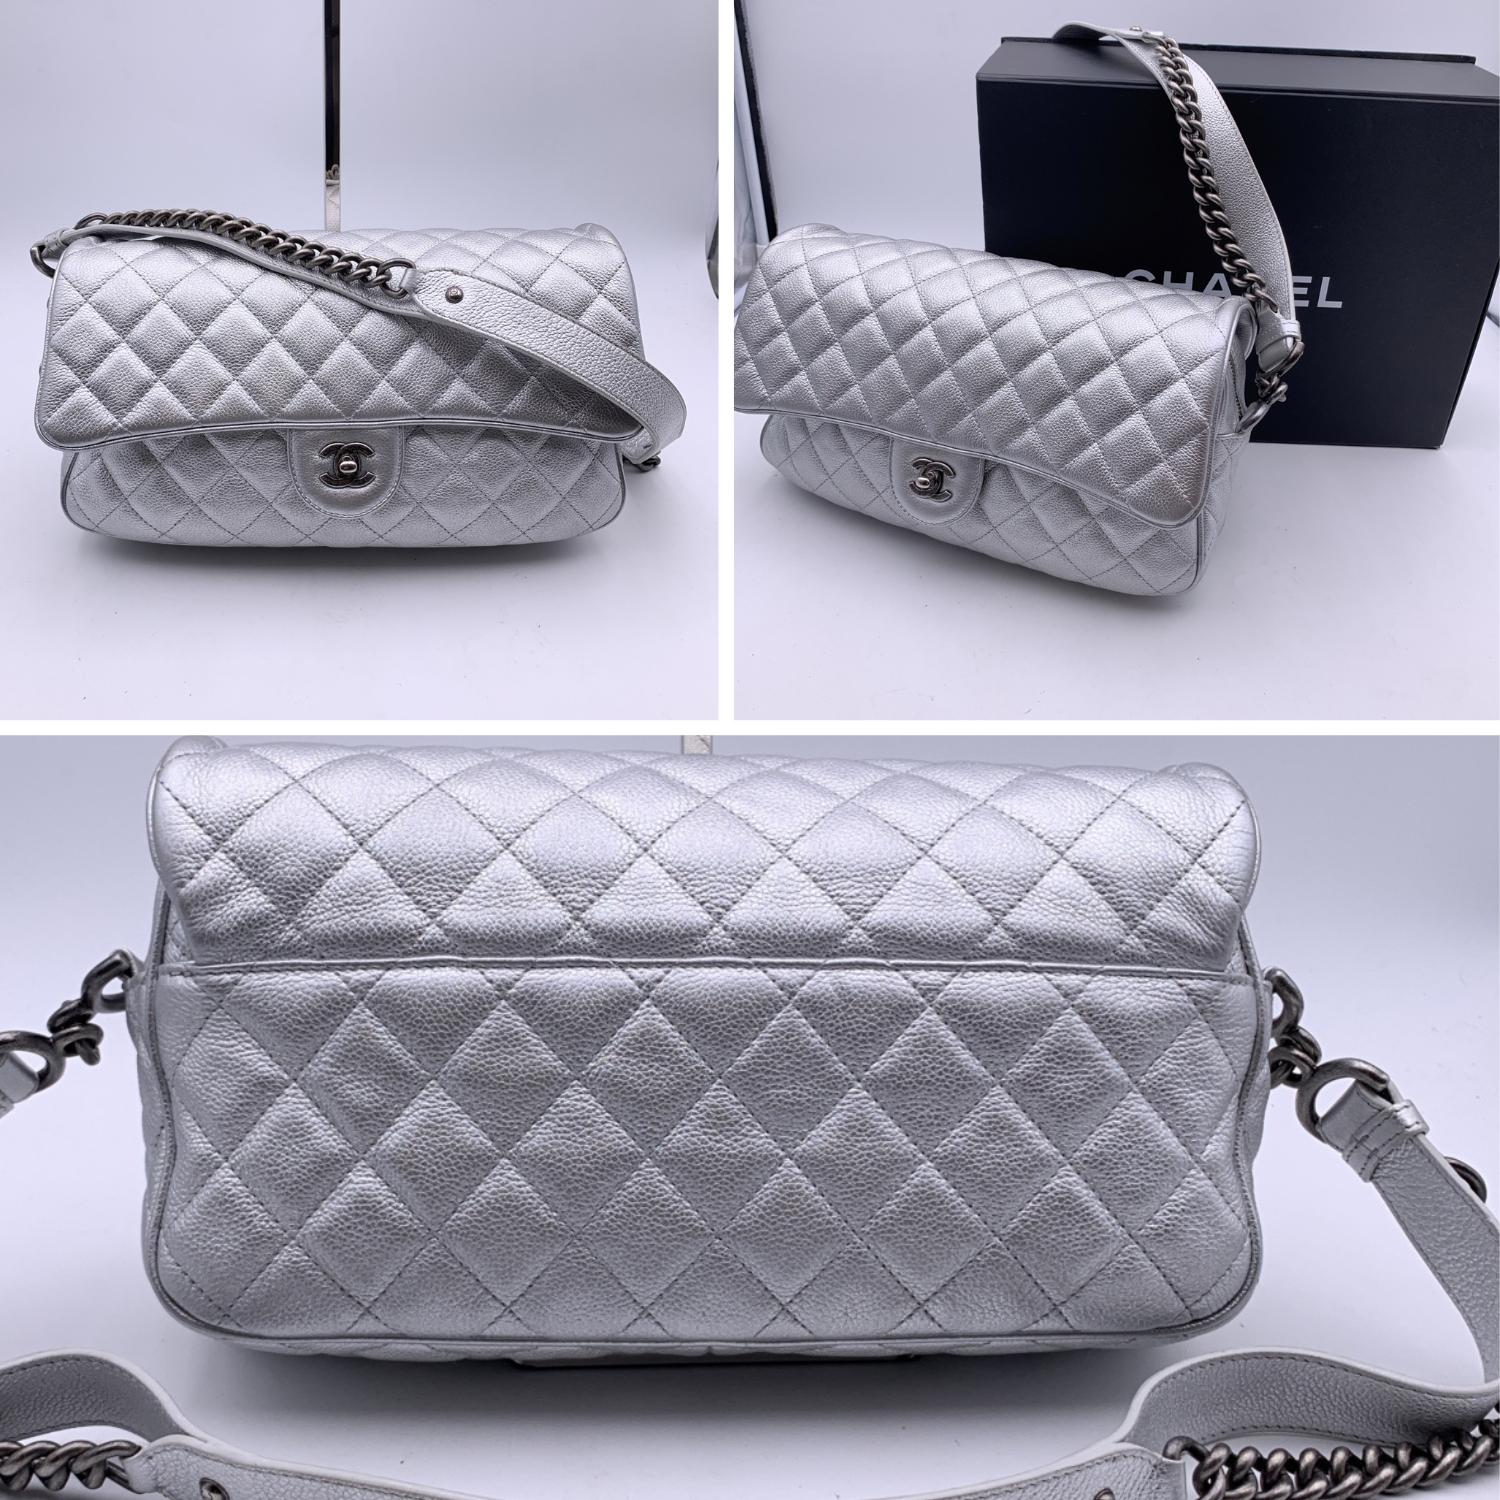 Chanel Airline 2016 Silver Quilted Leather Easy Flap Shoulder Bag For Sale 2